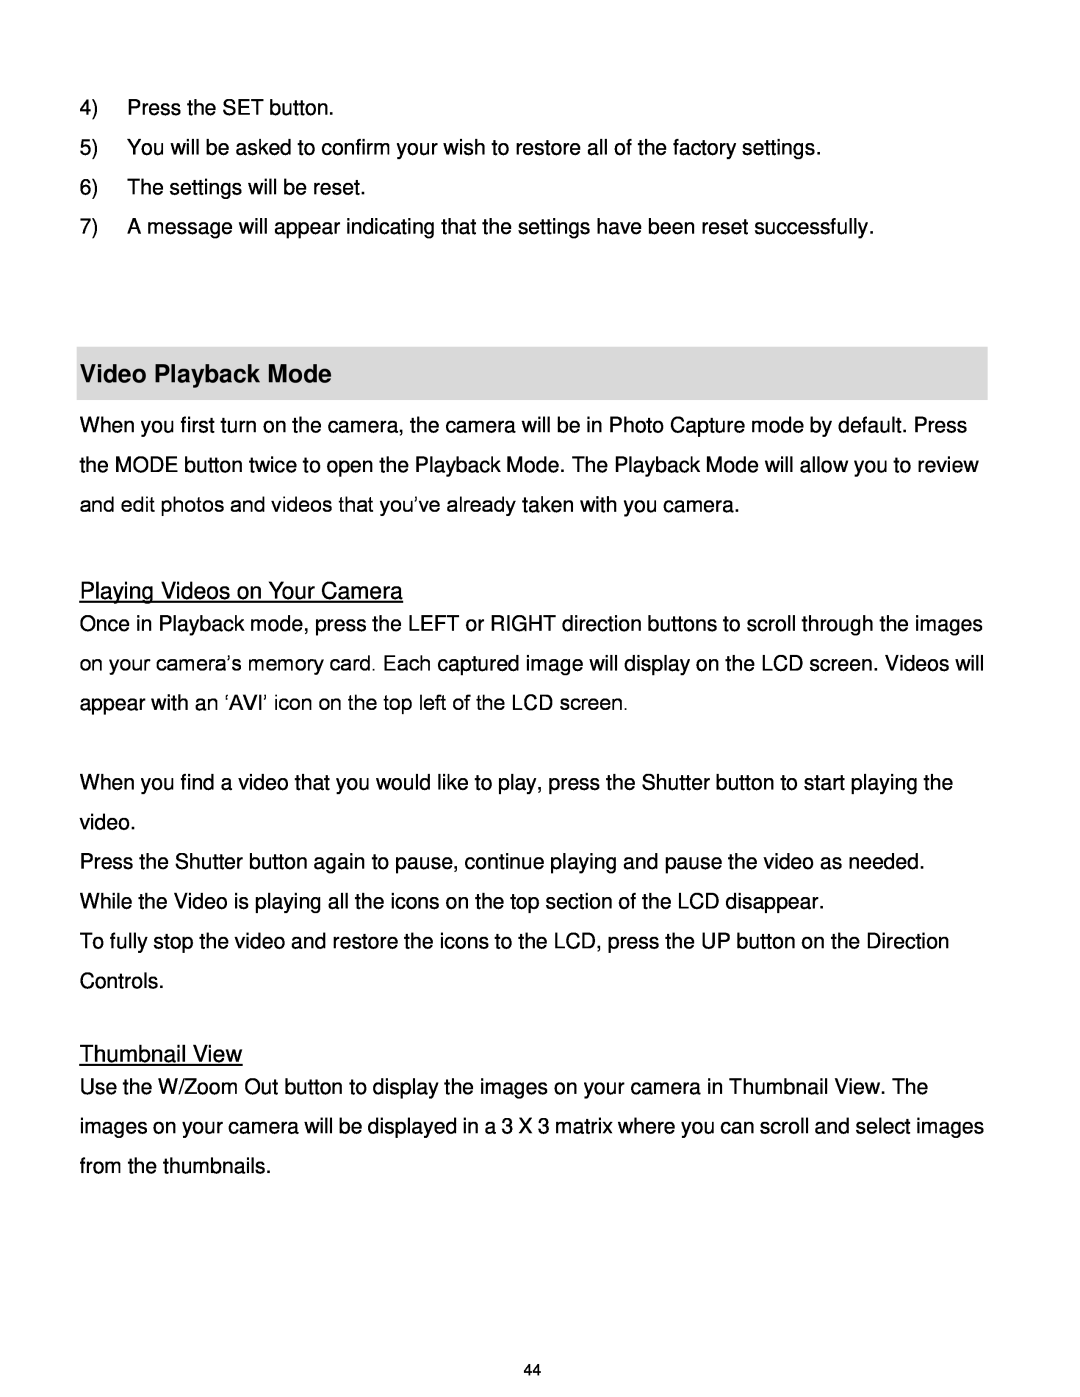 Vivitar T327 user manual Video Playback Mode, Playing Videos on Your Camera, Thumbnail View 